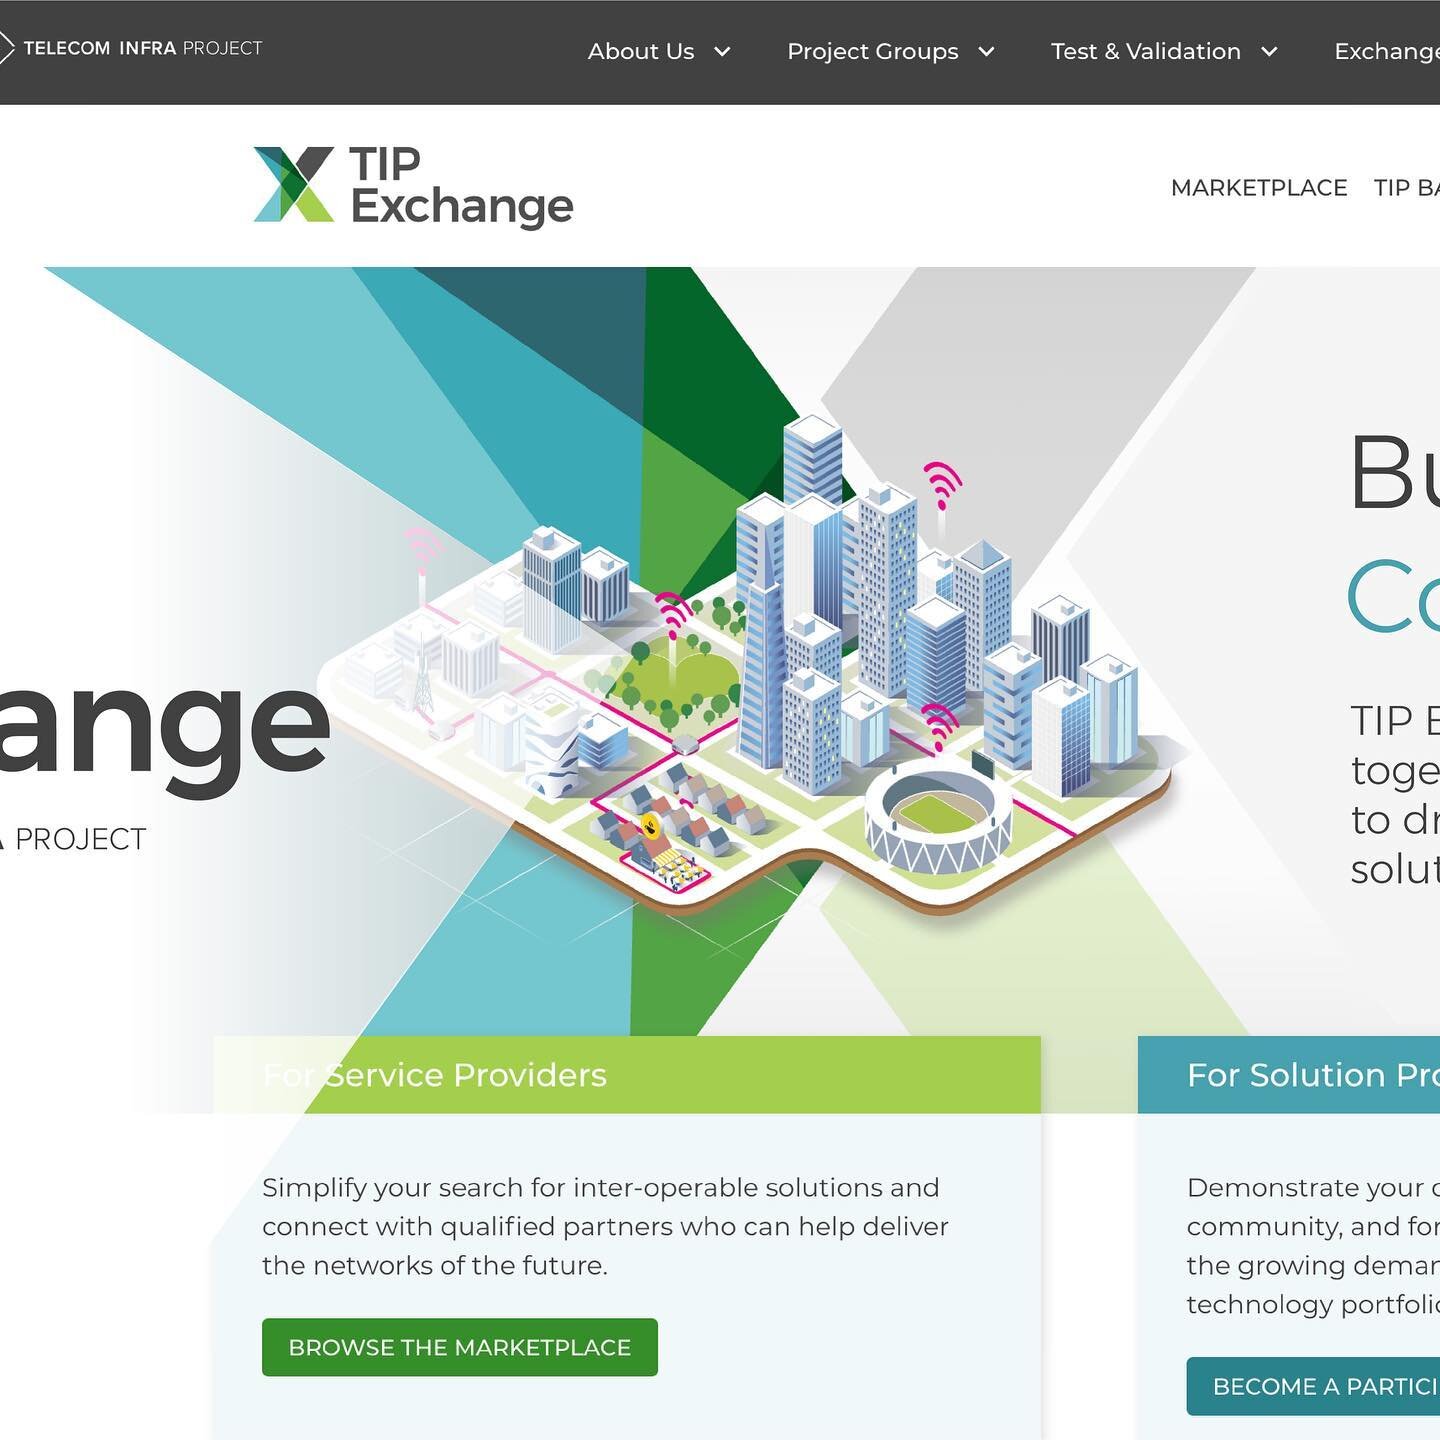 And a gorgeous #brandingdesign project for #tipexchange. #telecommunications #telcom #telco